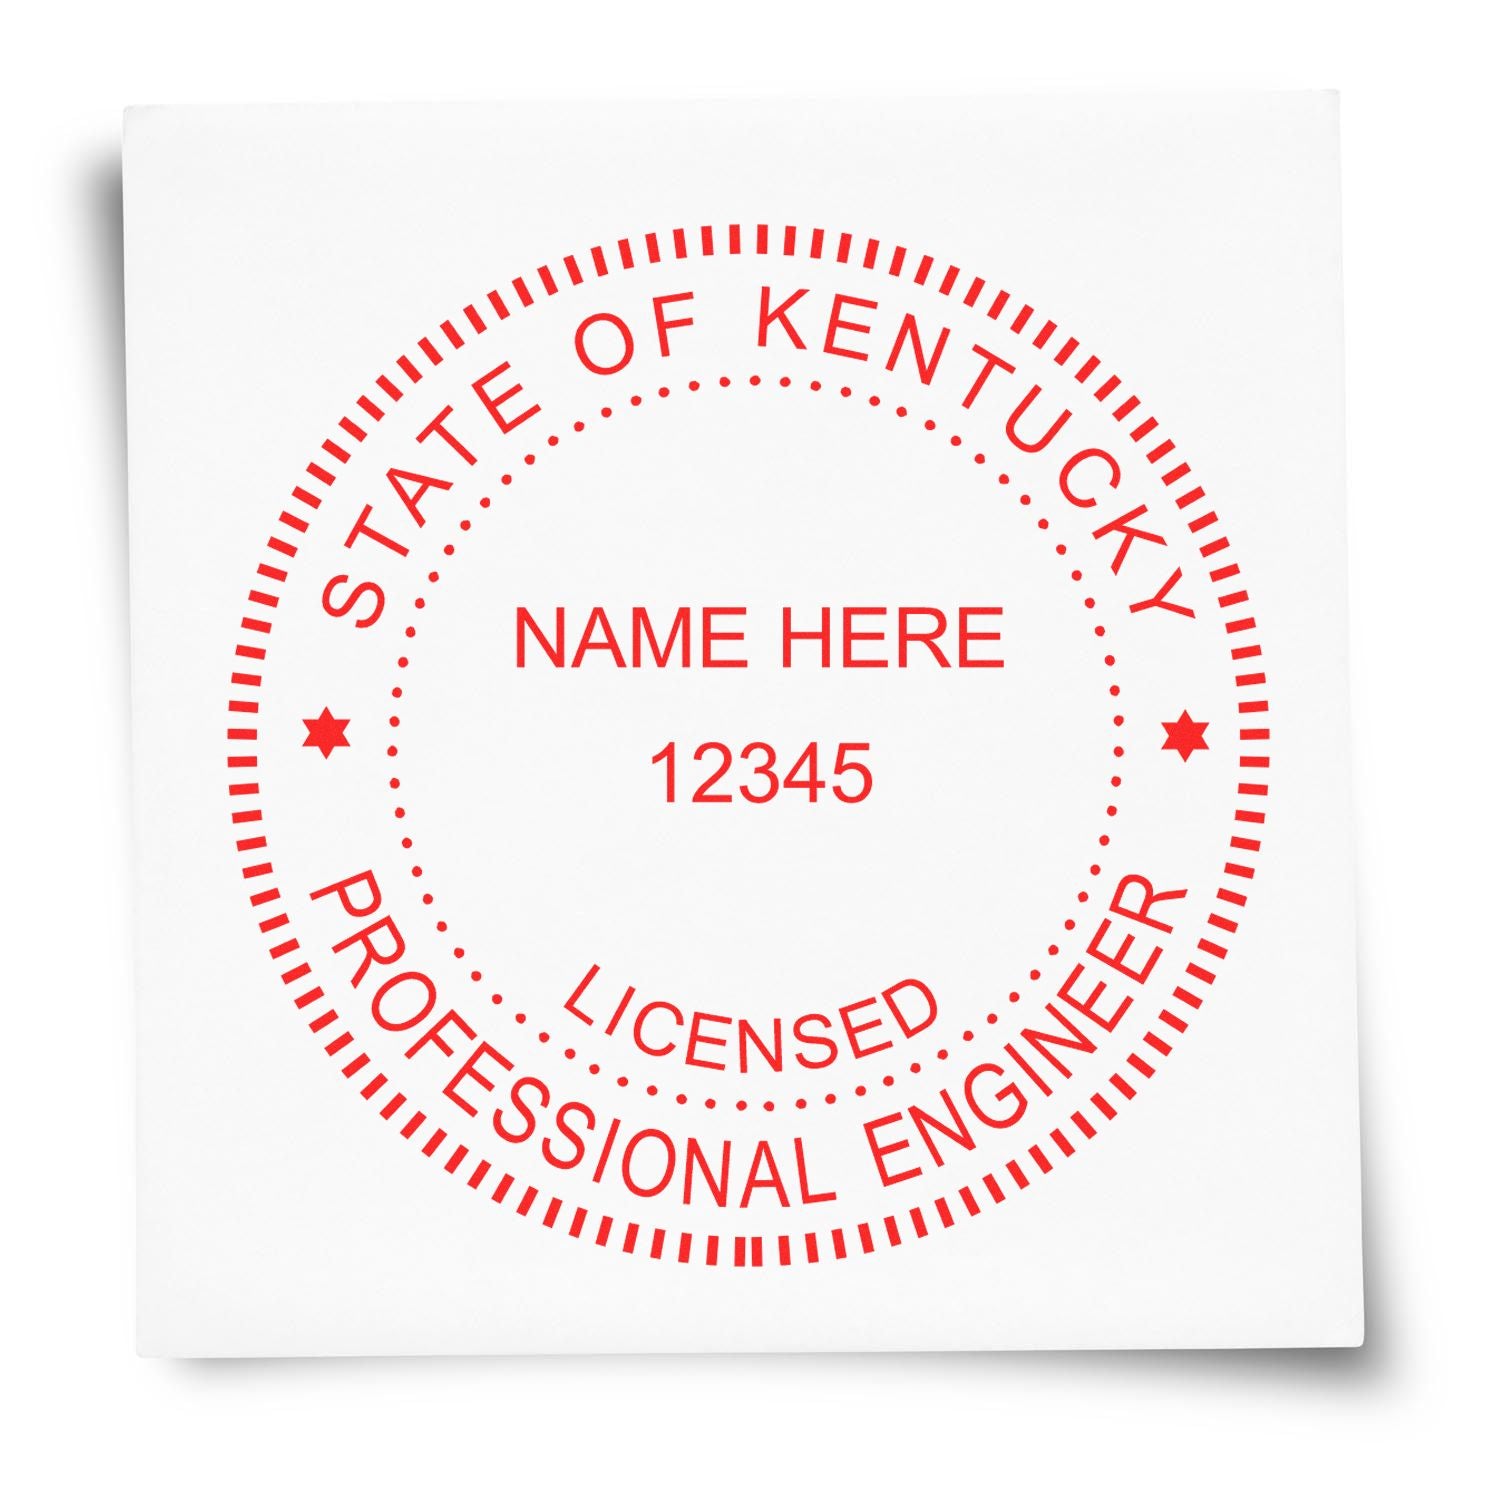 The main image for the Kentucky Professional Engineer Seal Stamp depicting a sample of the imprint and electronic files